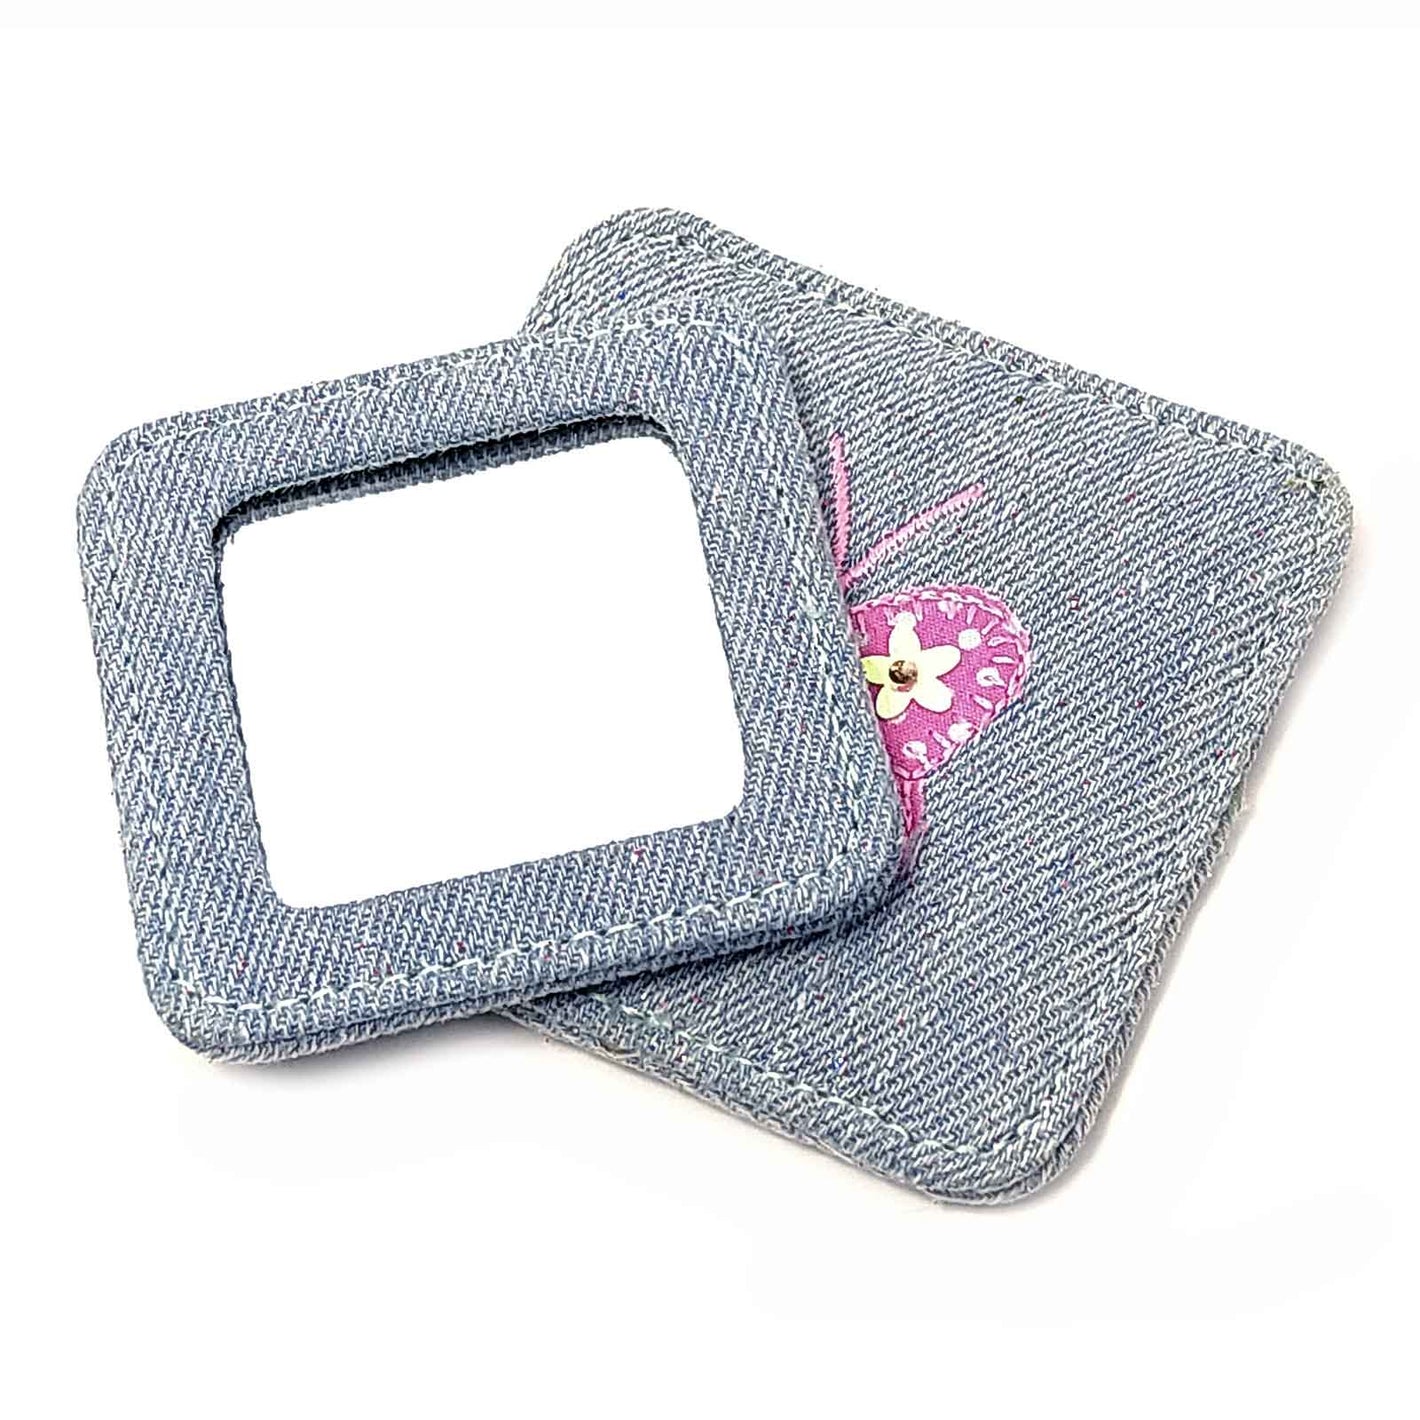 Girls Denim Look Compact Mirror with Butterfly Design - Compact Mirror by Fashion Accessories